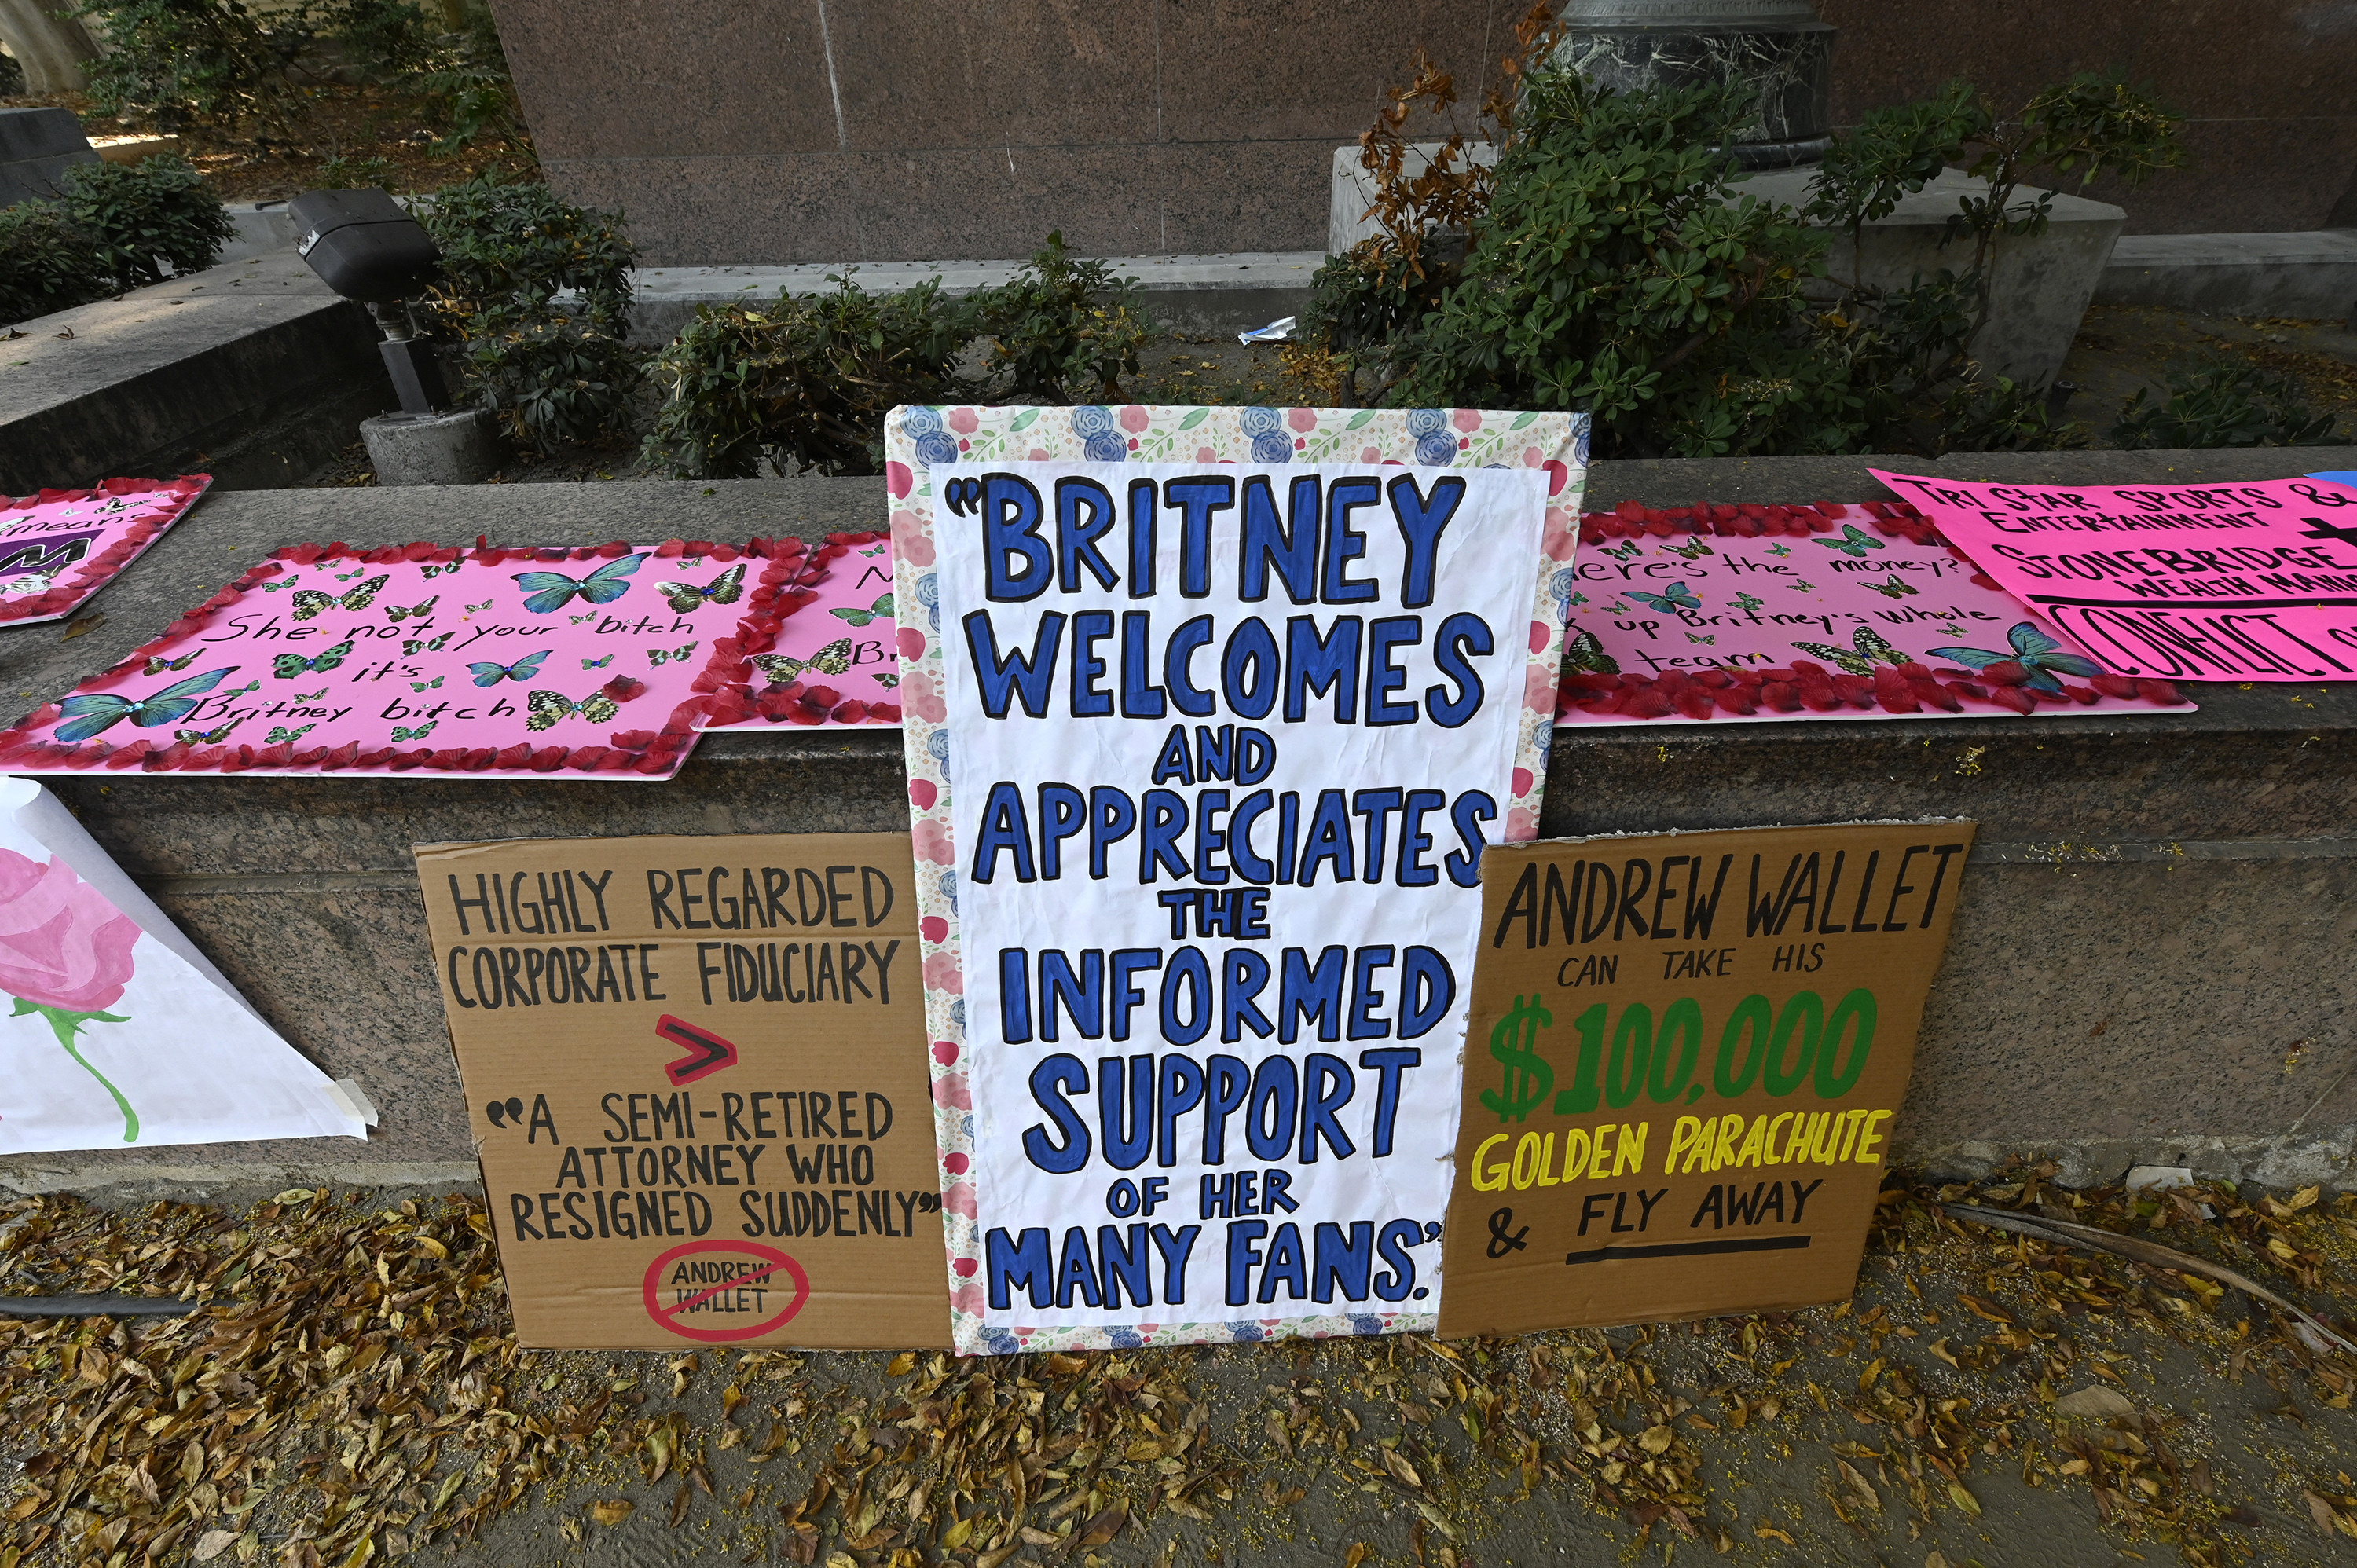 Cardboard signs read &quot;Britney welcomes and appreciates the informed support of her many fans&quot; and &quot;Highly regarded corporate fiduciary &amp;gt; a semi-retired attorney who resigned suddenly&quot;